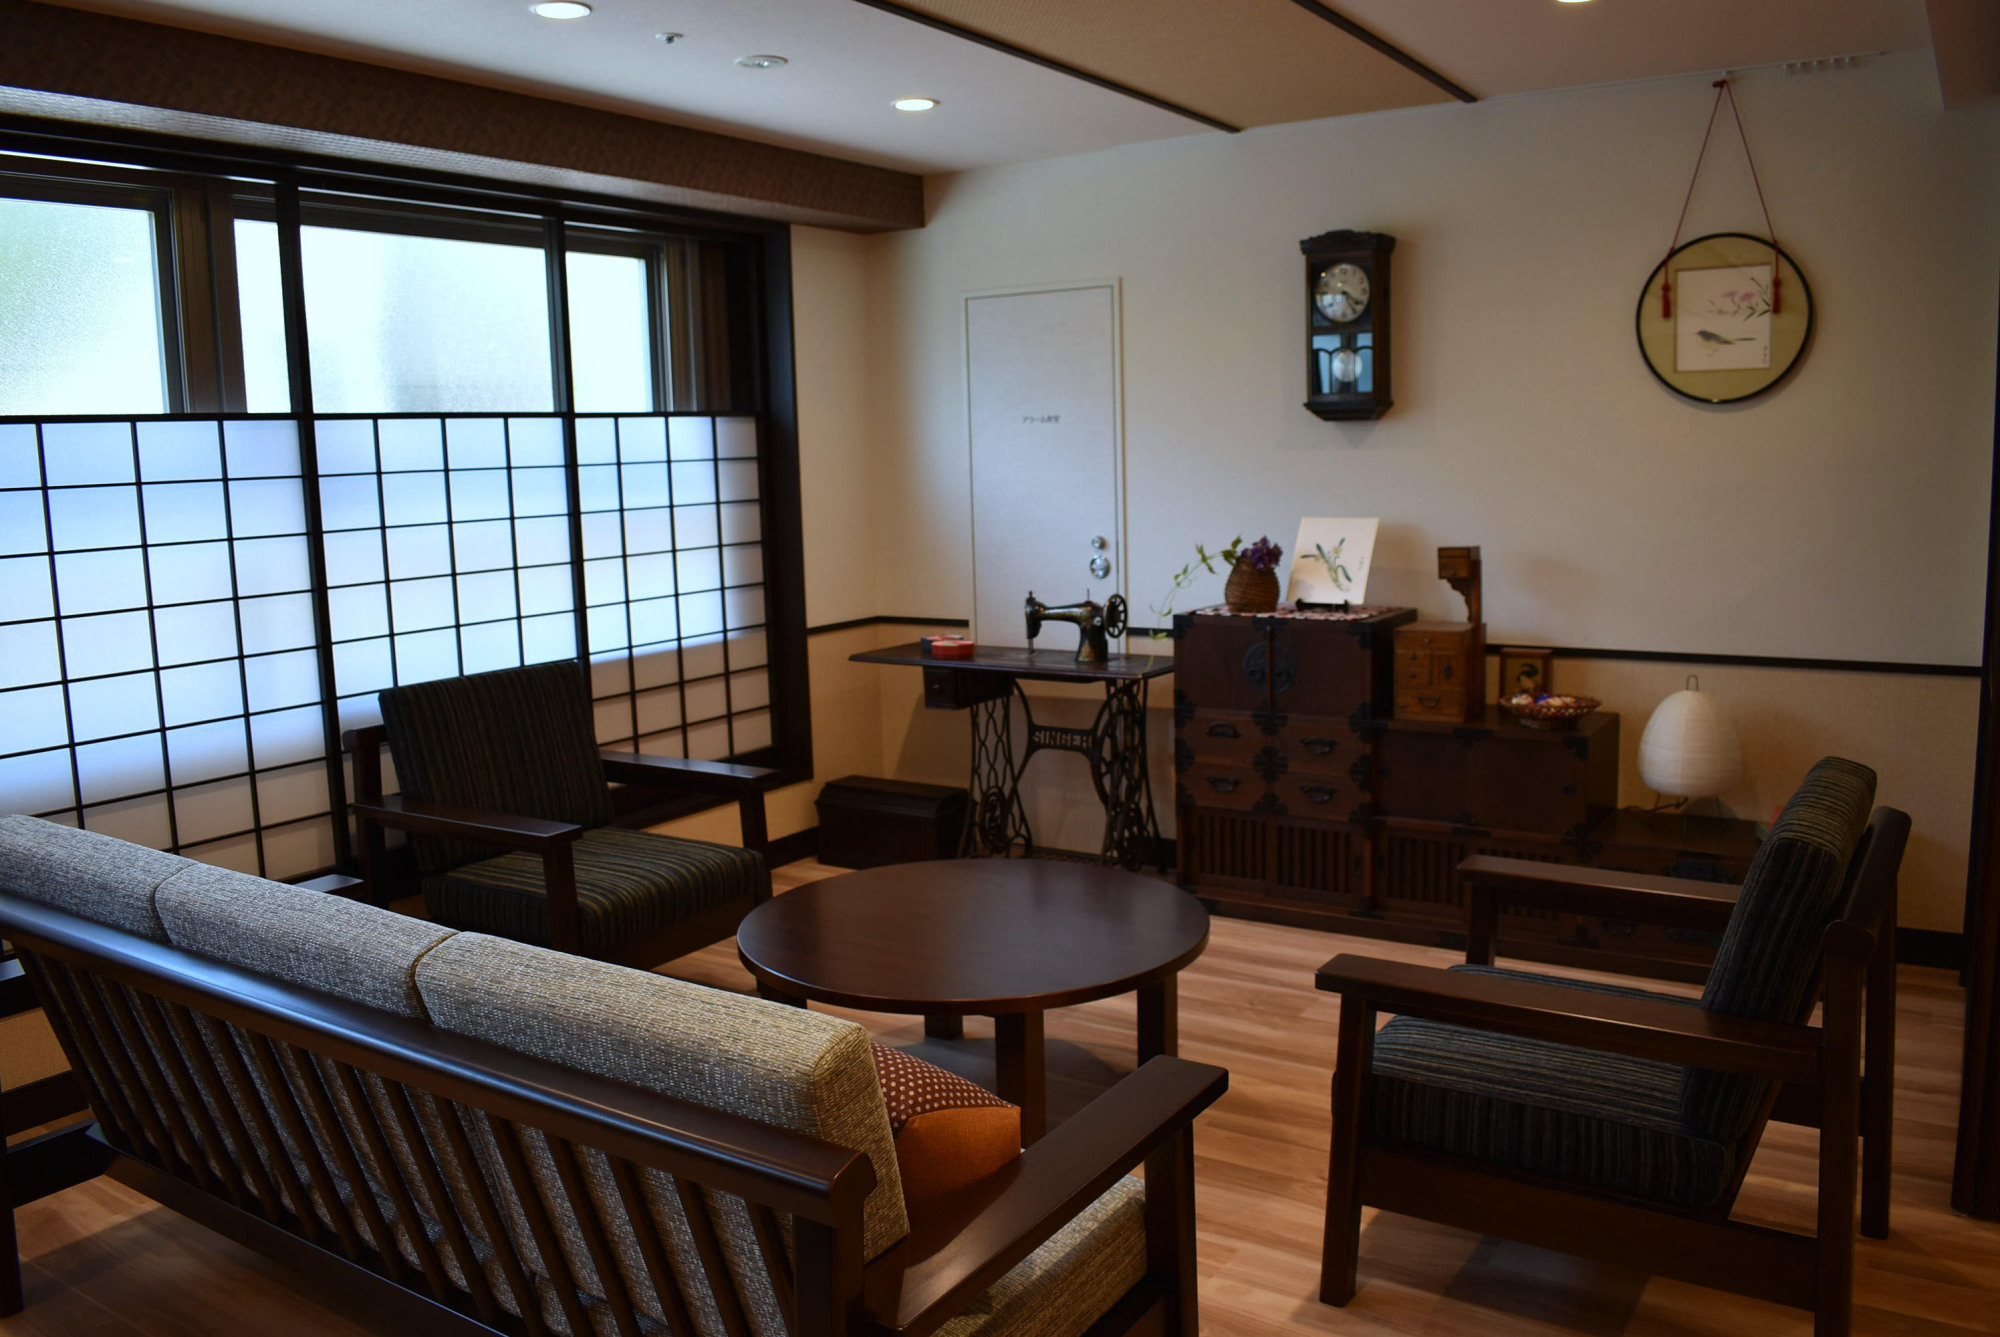 A lounge with a nostalgic atmosphere helps residents feel relaxed at this dementia-friendly care home for the elderly in Tokyo's Setagaya Ward. | SATOKO KAWASAKI